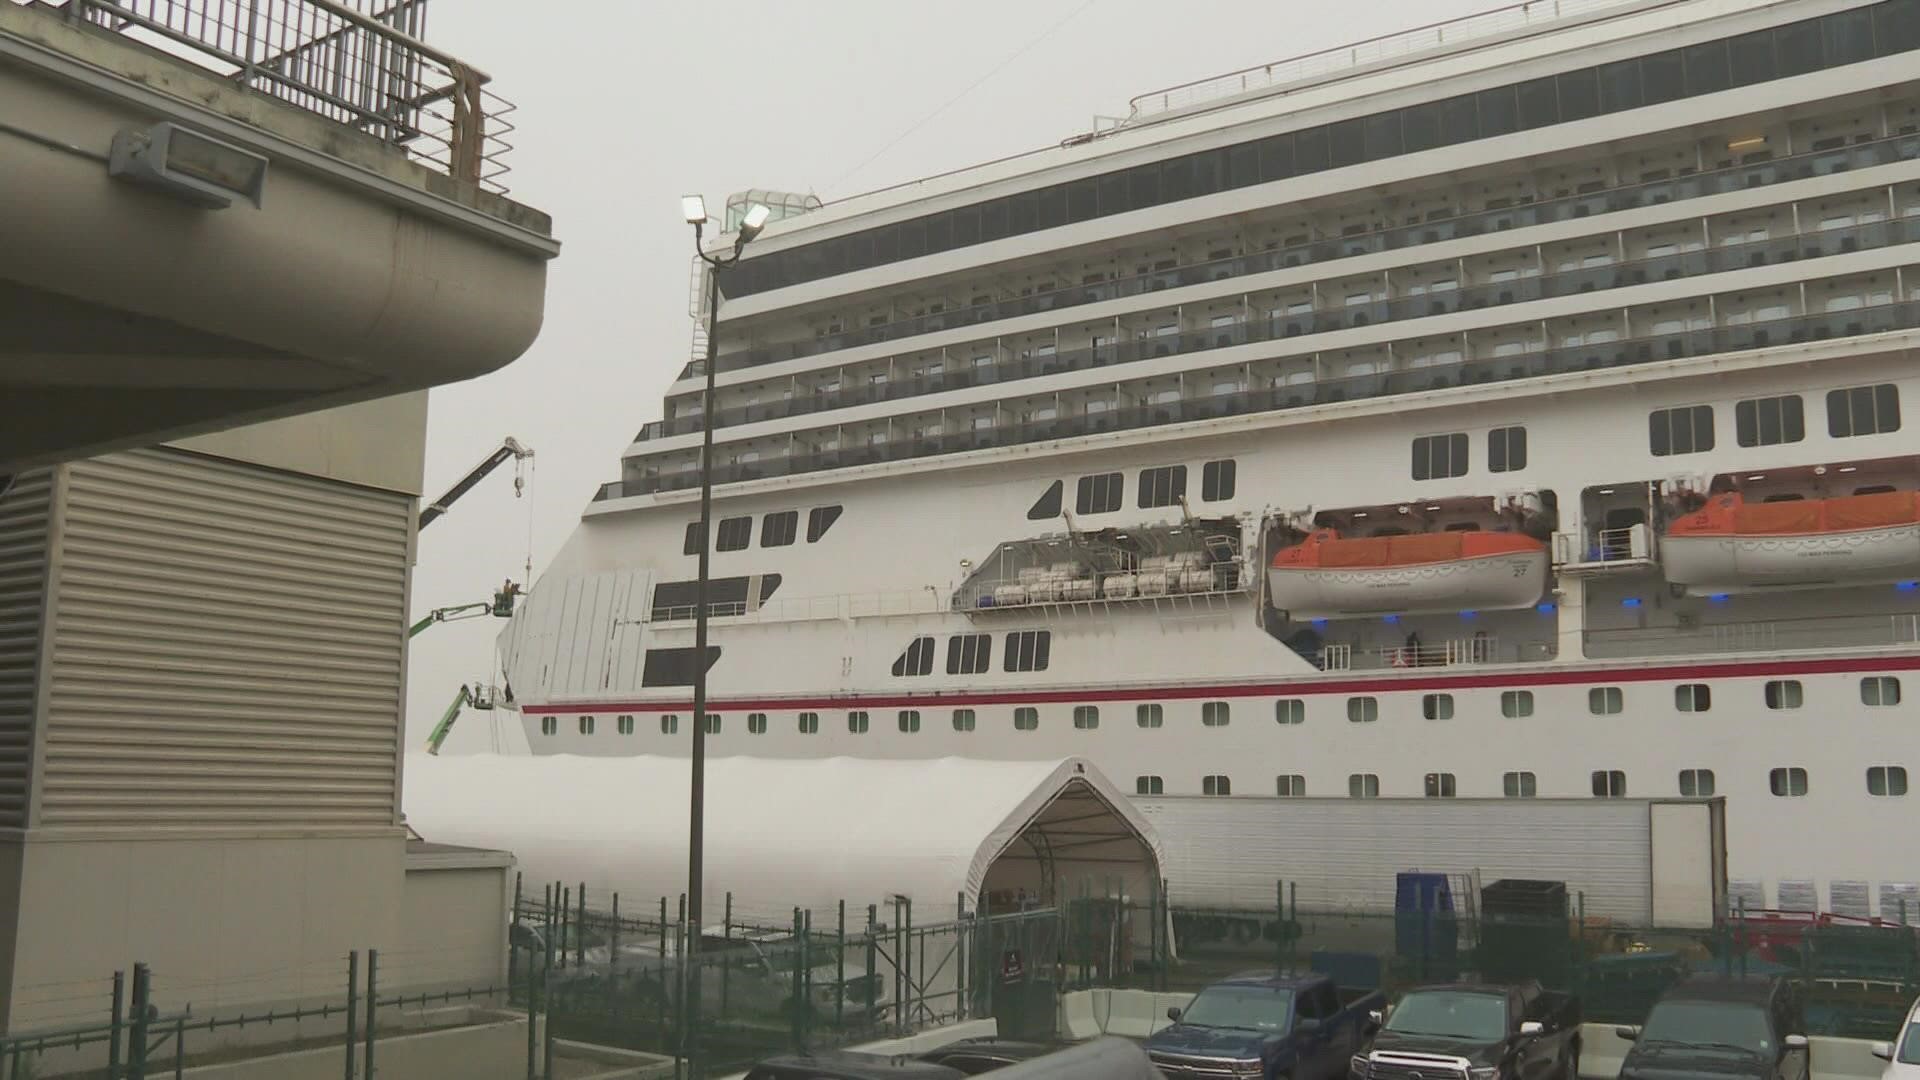 Carnival has reconvened their trips after 18 months with a 7-day cruise out of the Port of Orleans.